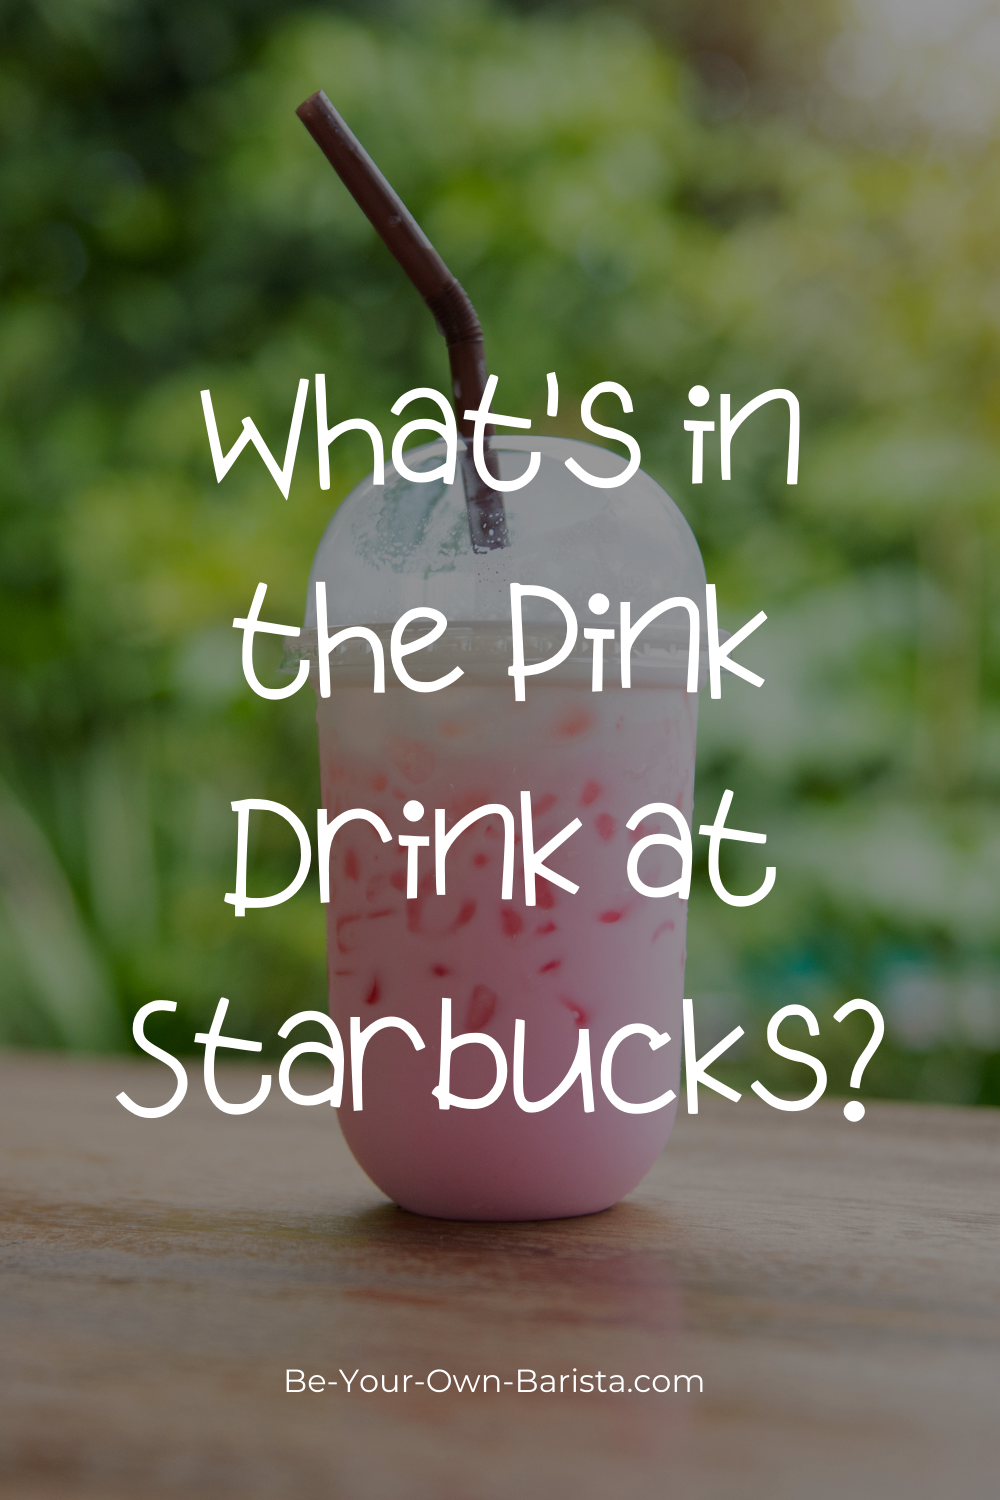 What’s in the Pink Drink at Starbucks?